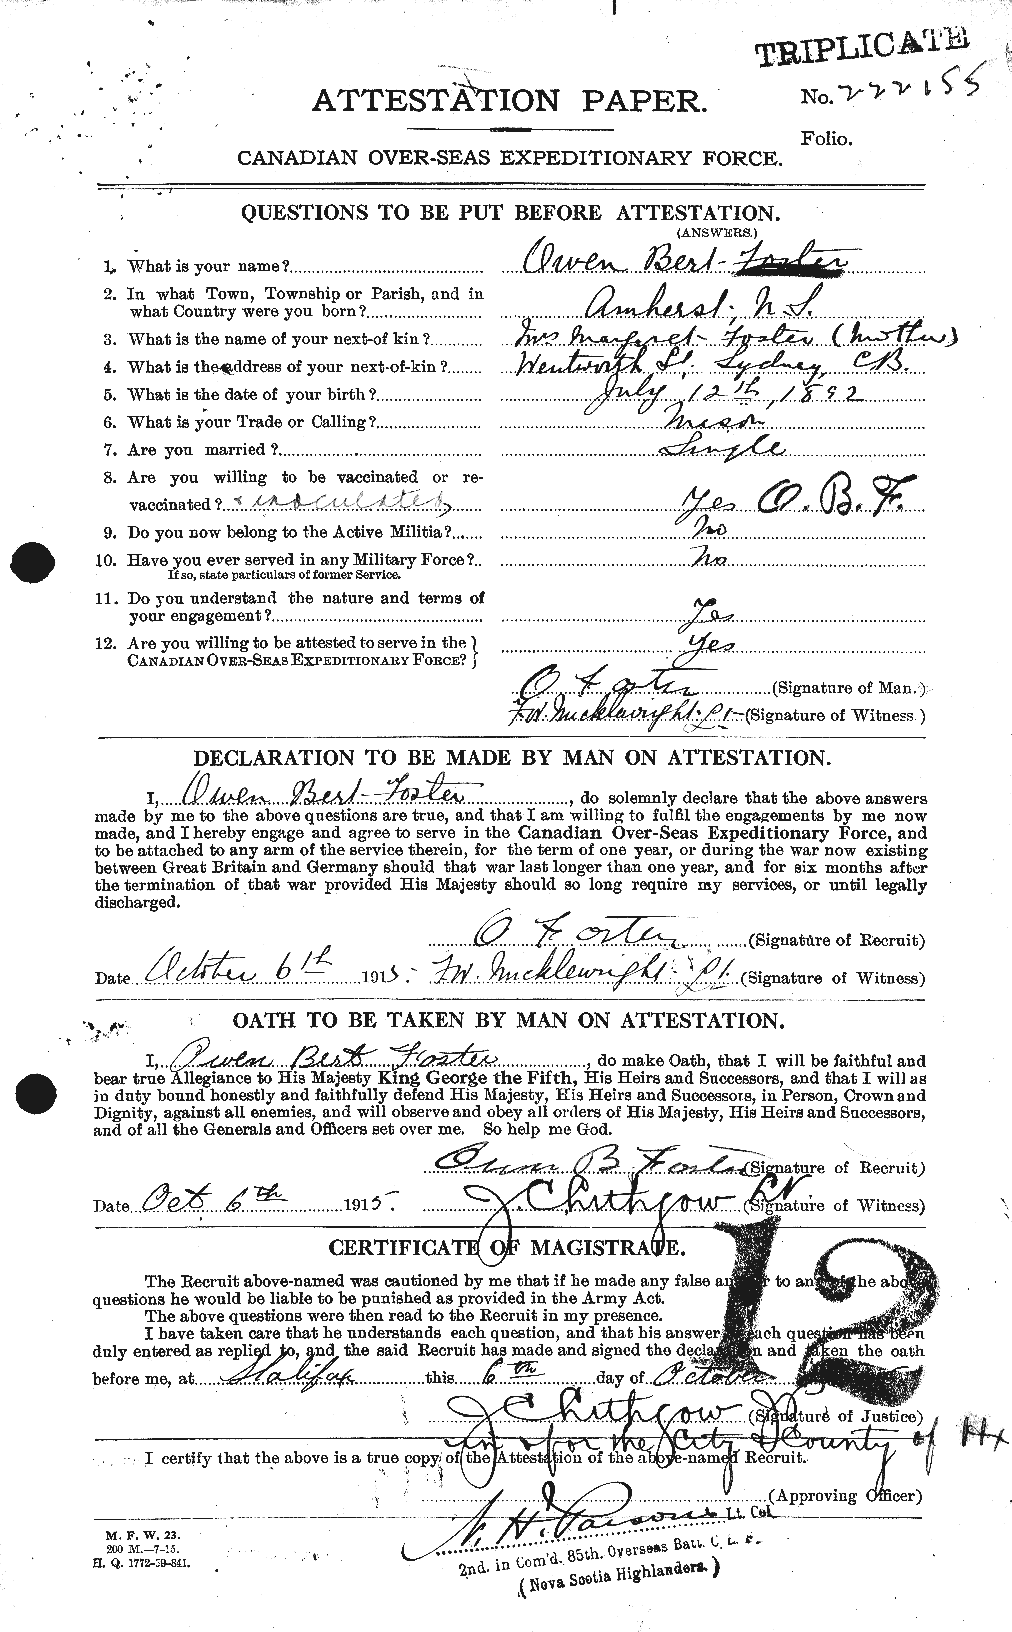 Personnel Records of the First World War - CEF 333437a